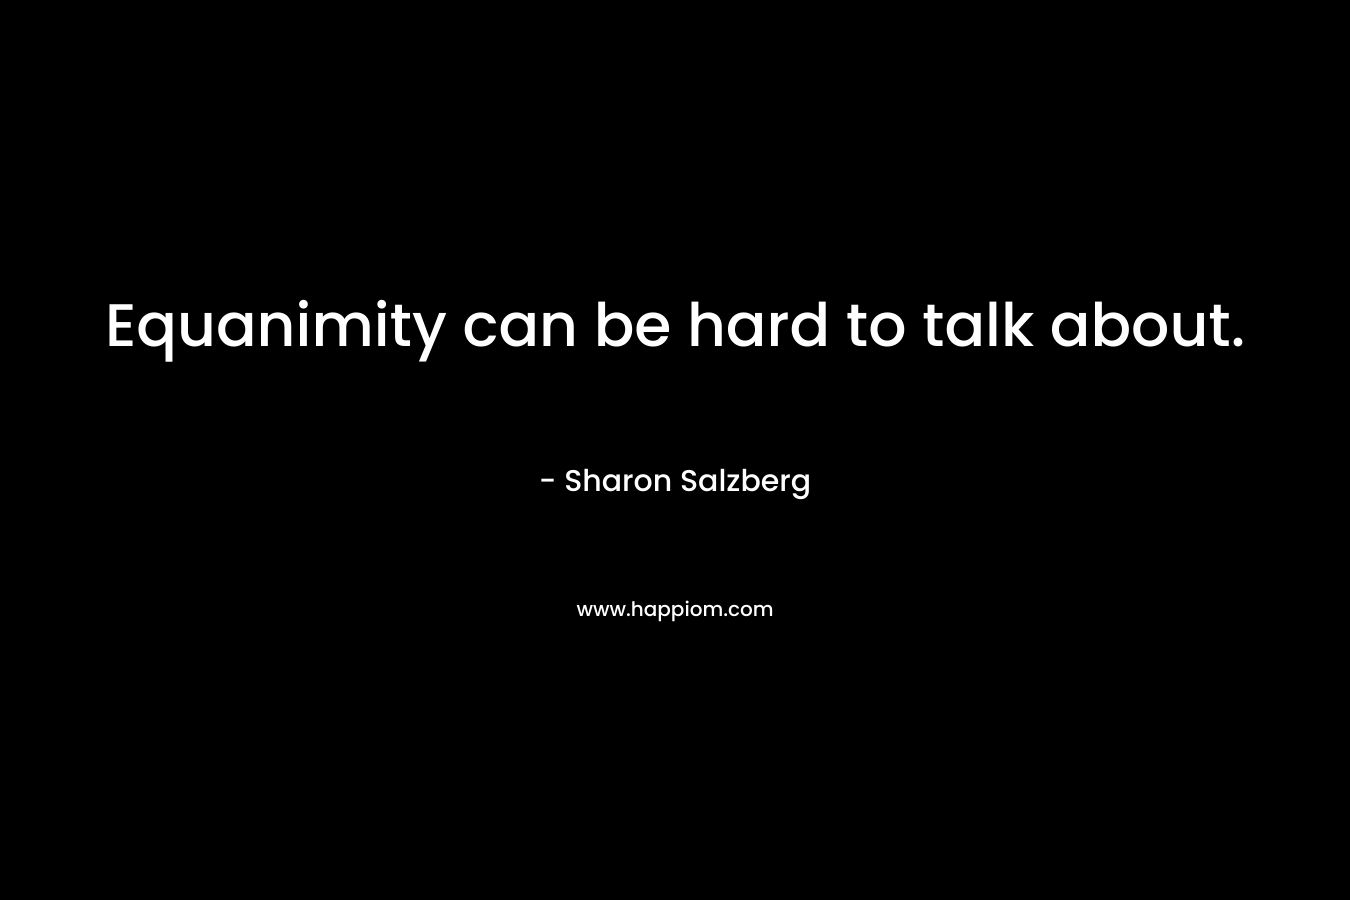 Equanimity can be hard to talk about. – Sharon Salzberg